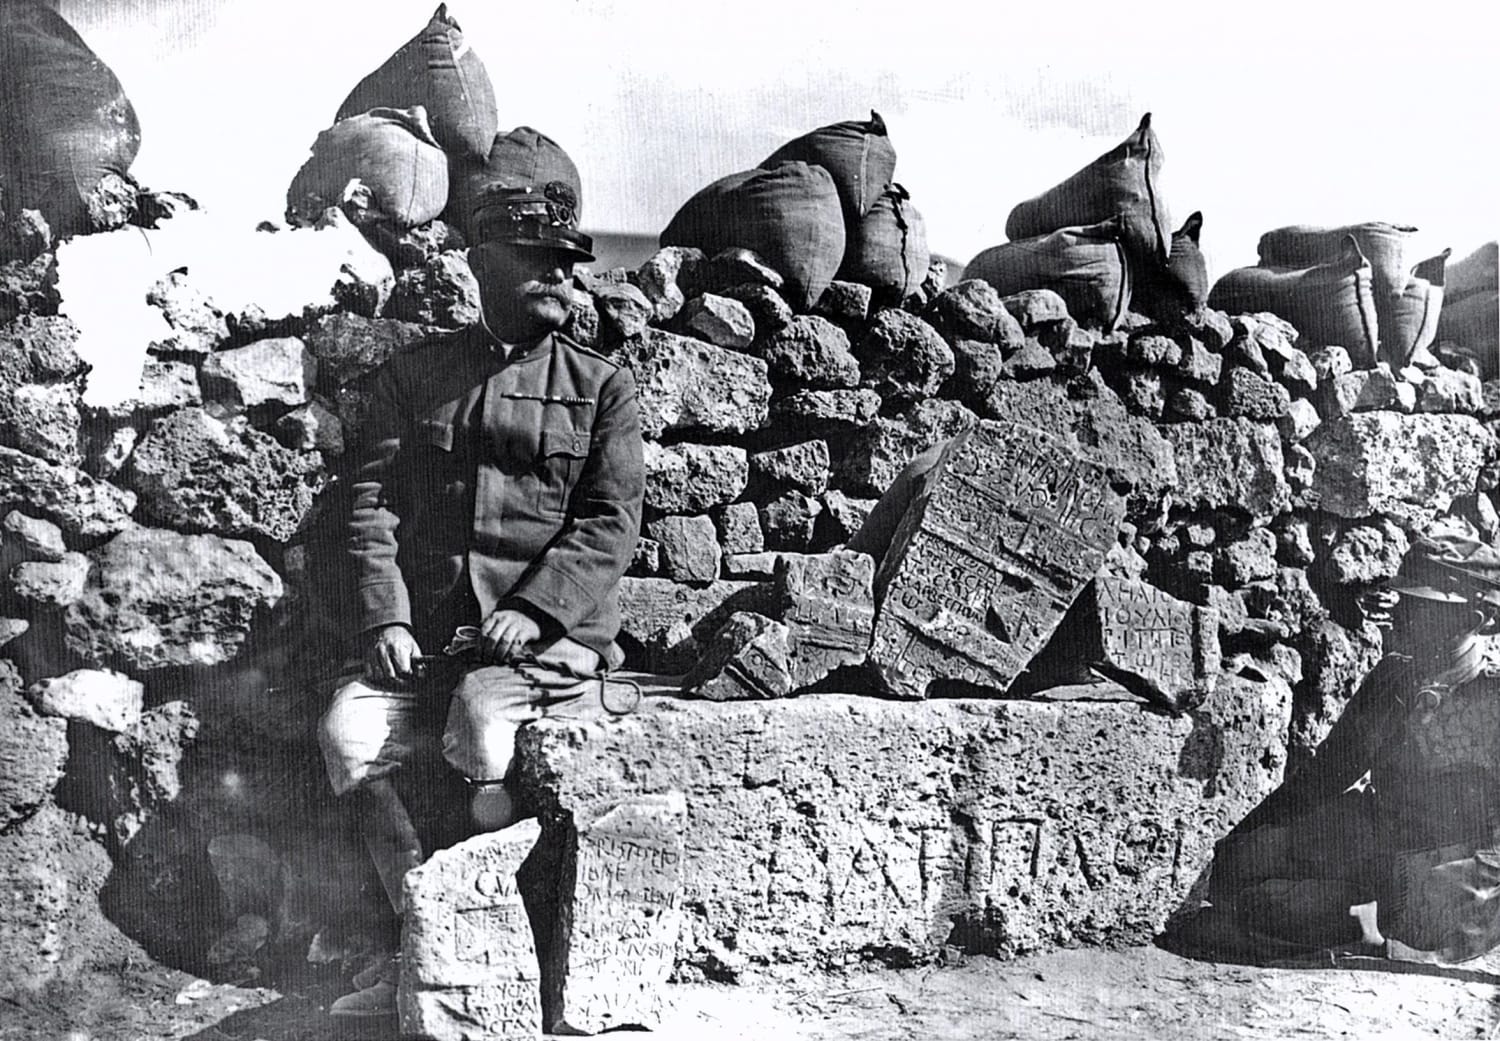 An Italian officer poses next to ancient ruins in a trench in Libya during the Italo-Turkish War, 1911